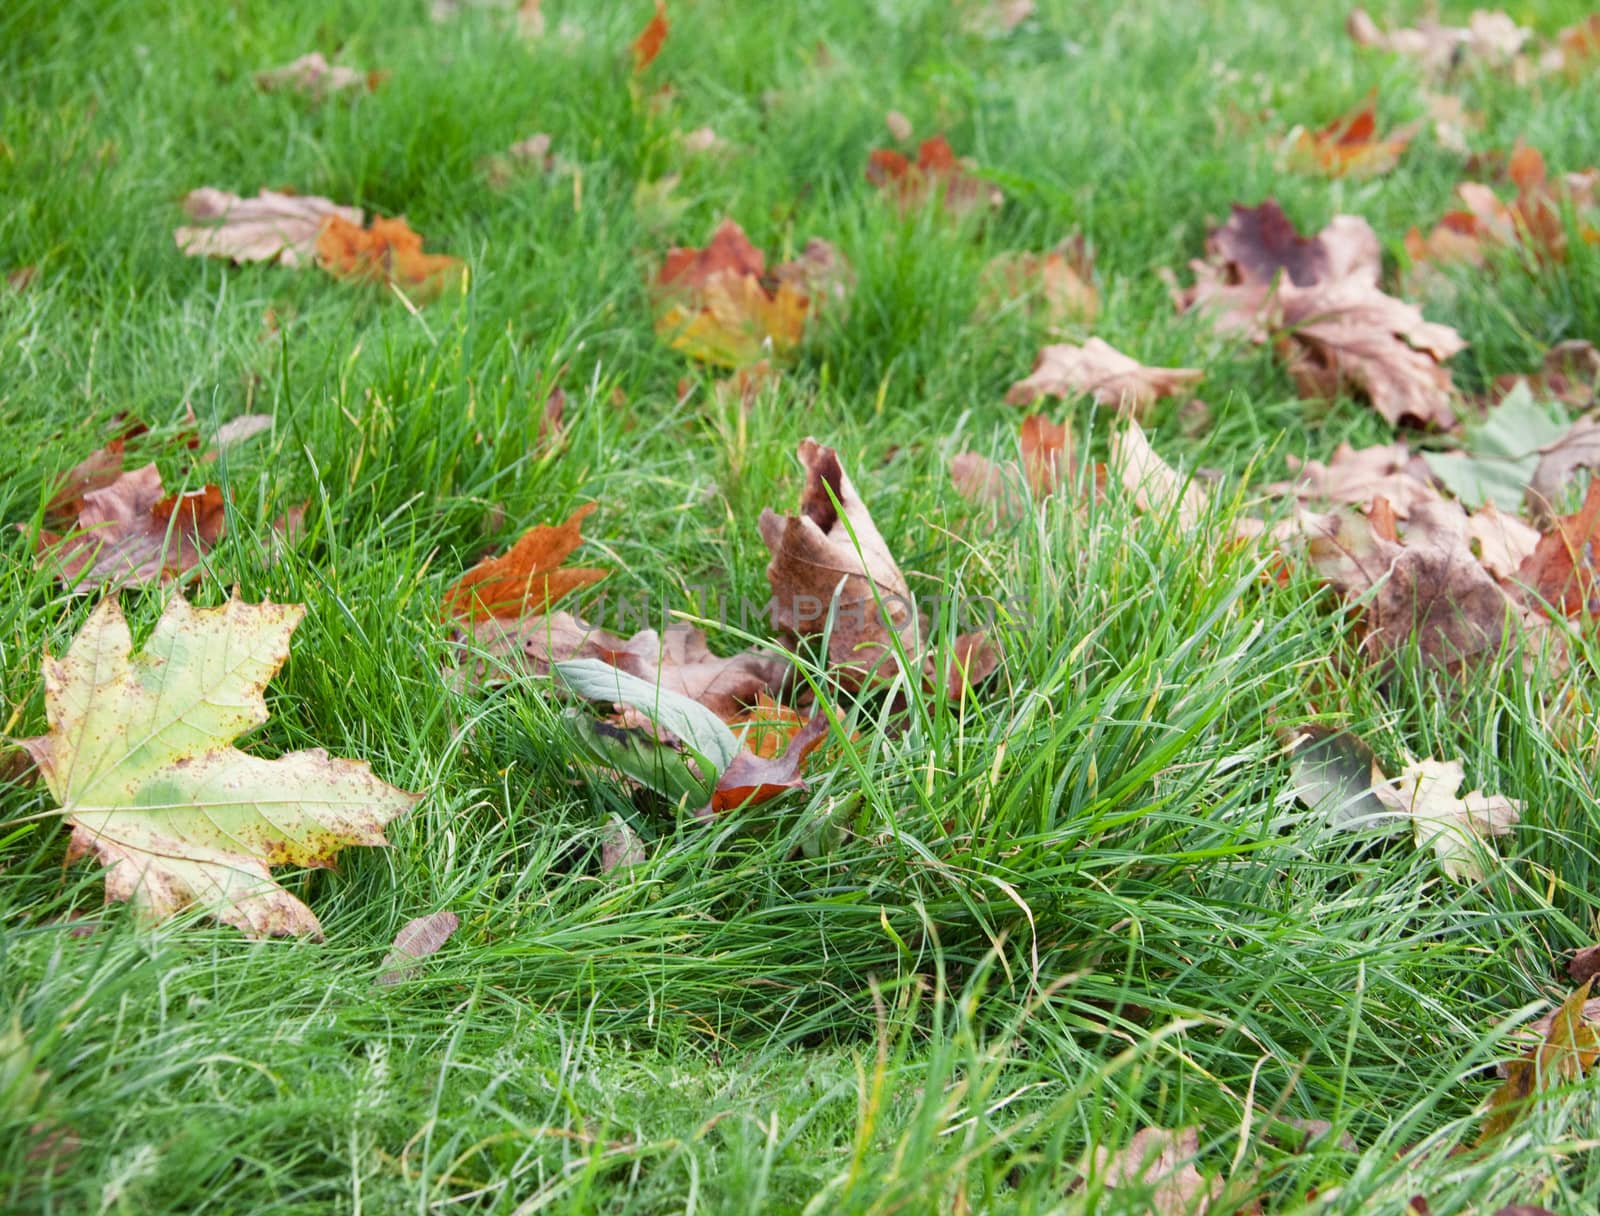 Dry leaves in grass